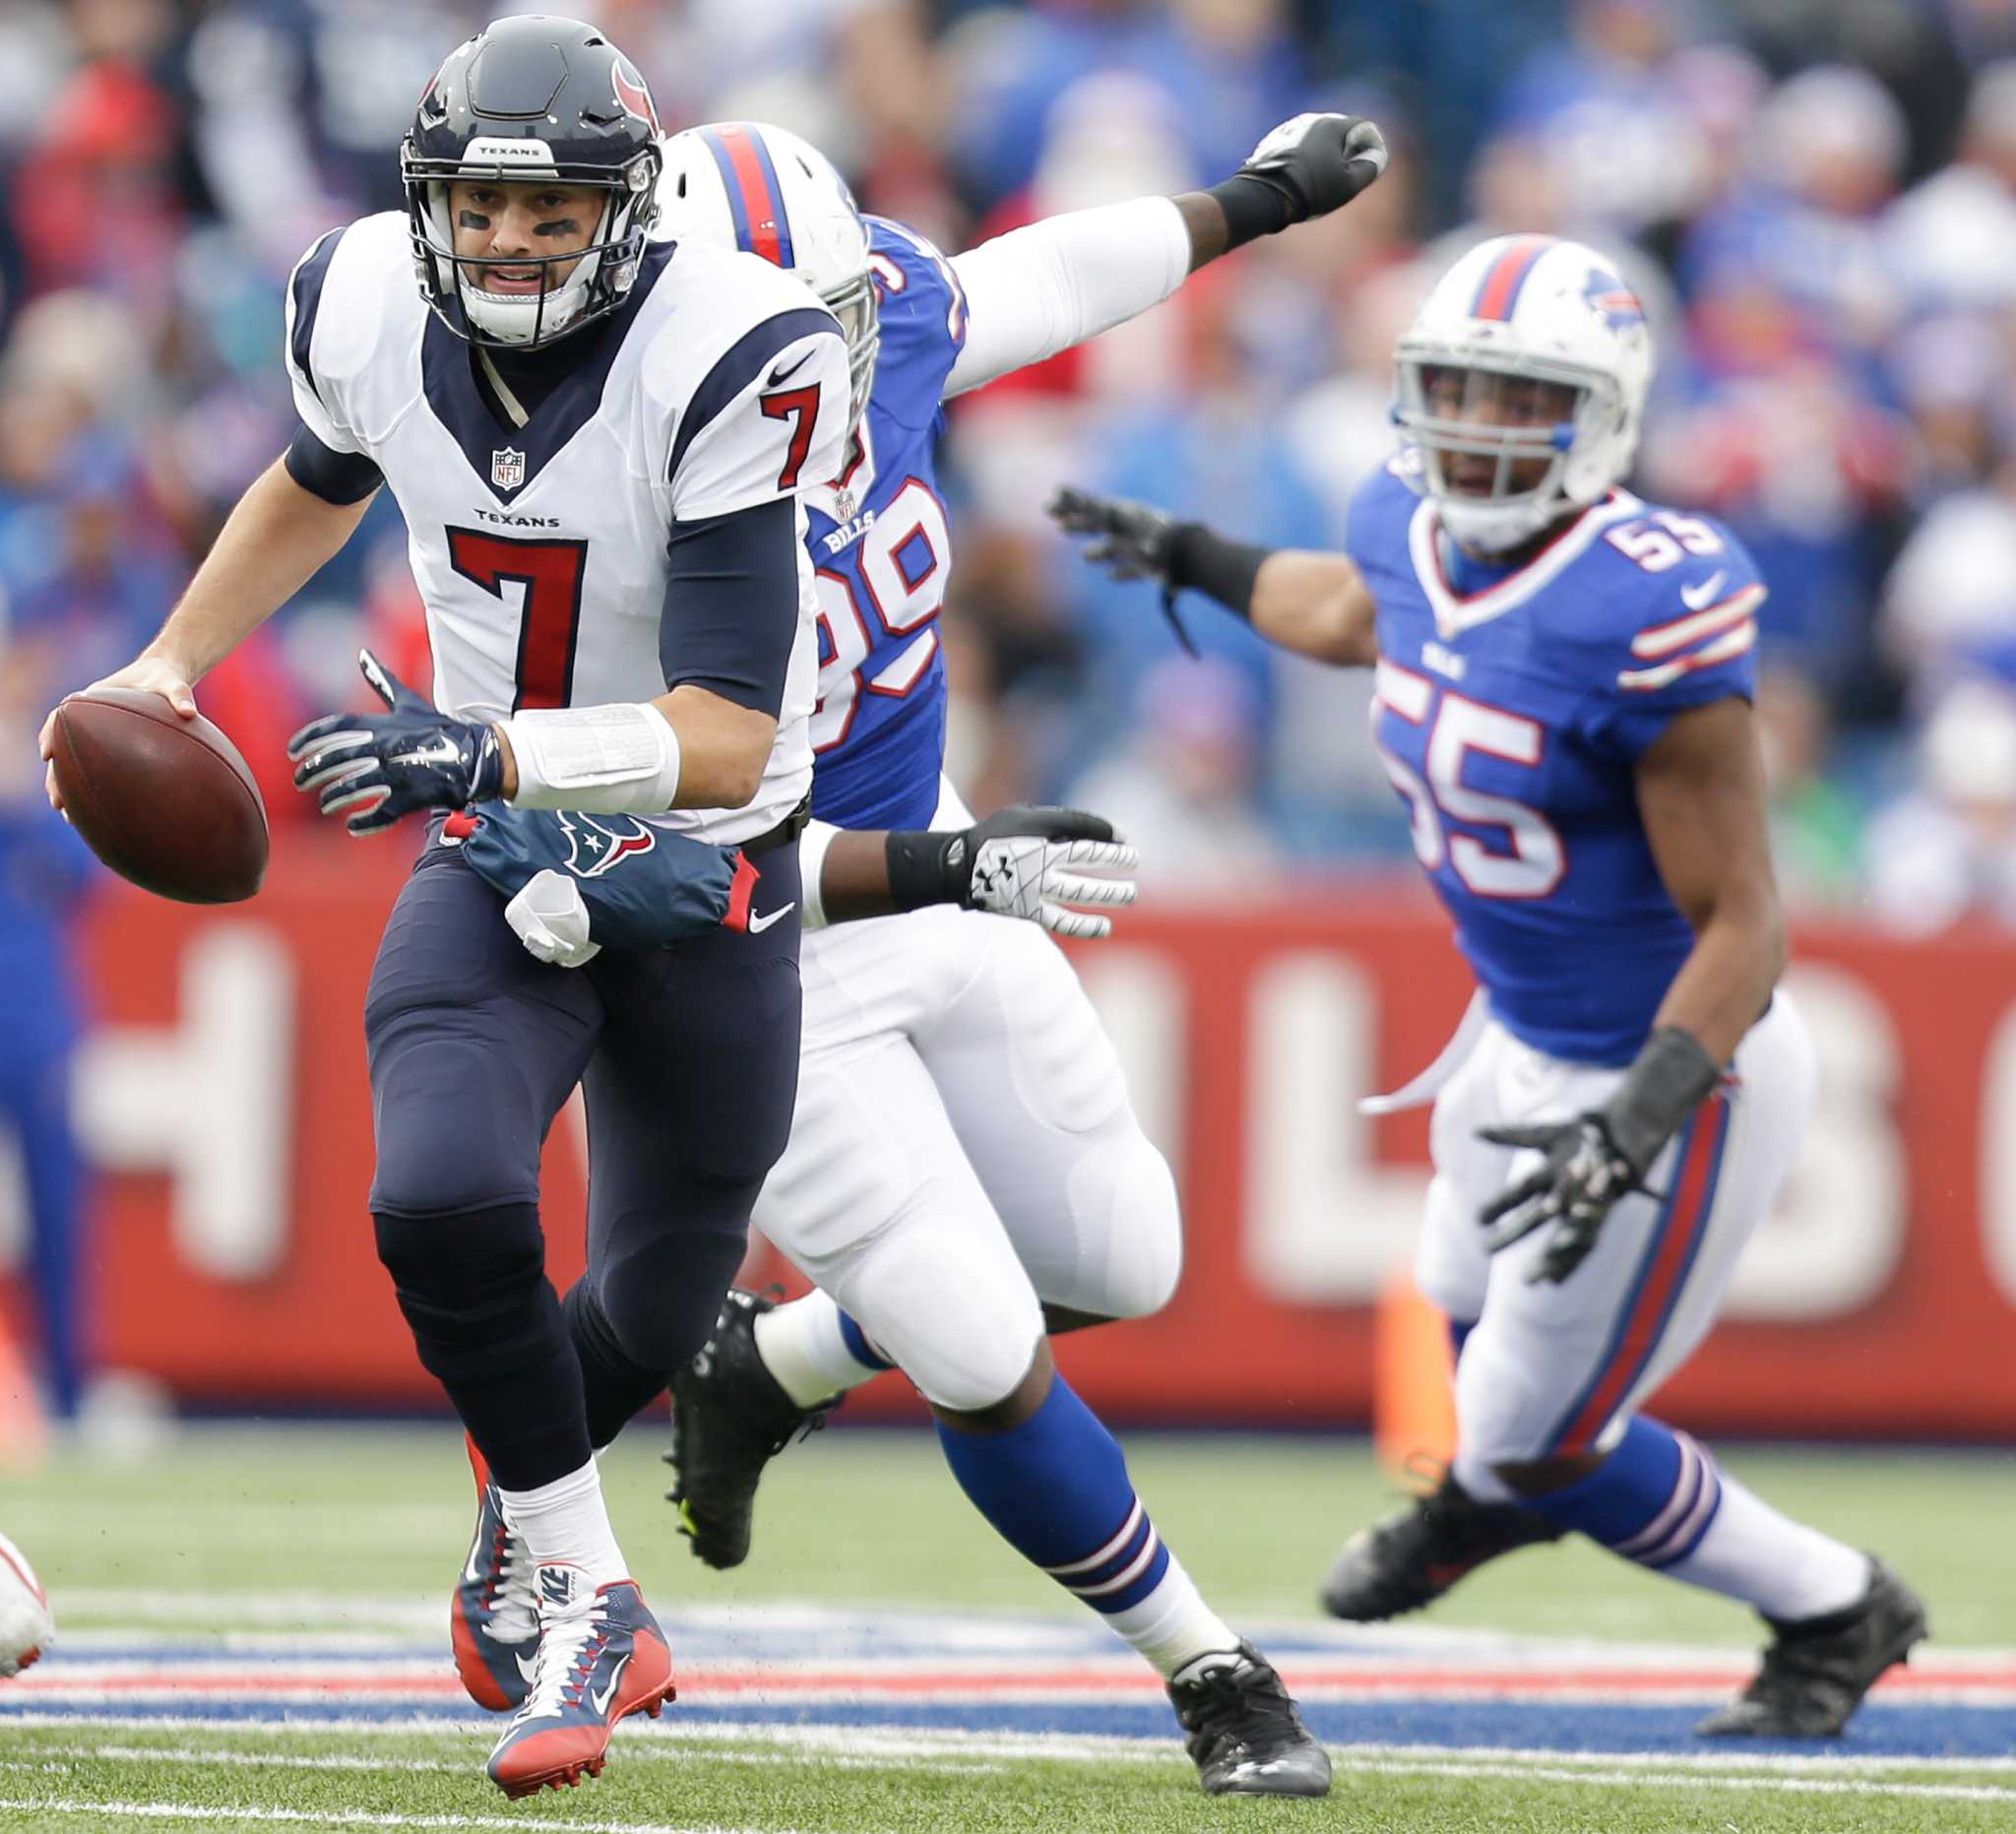 Brian Hoyer on next man up mentality: 'You've always got to be